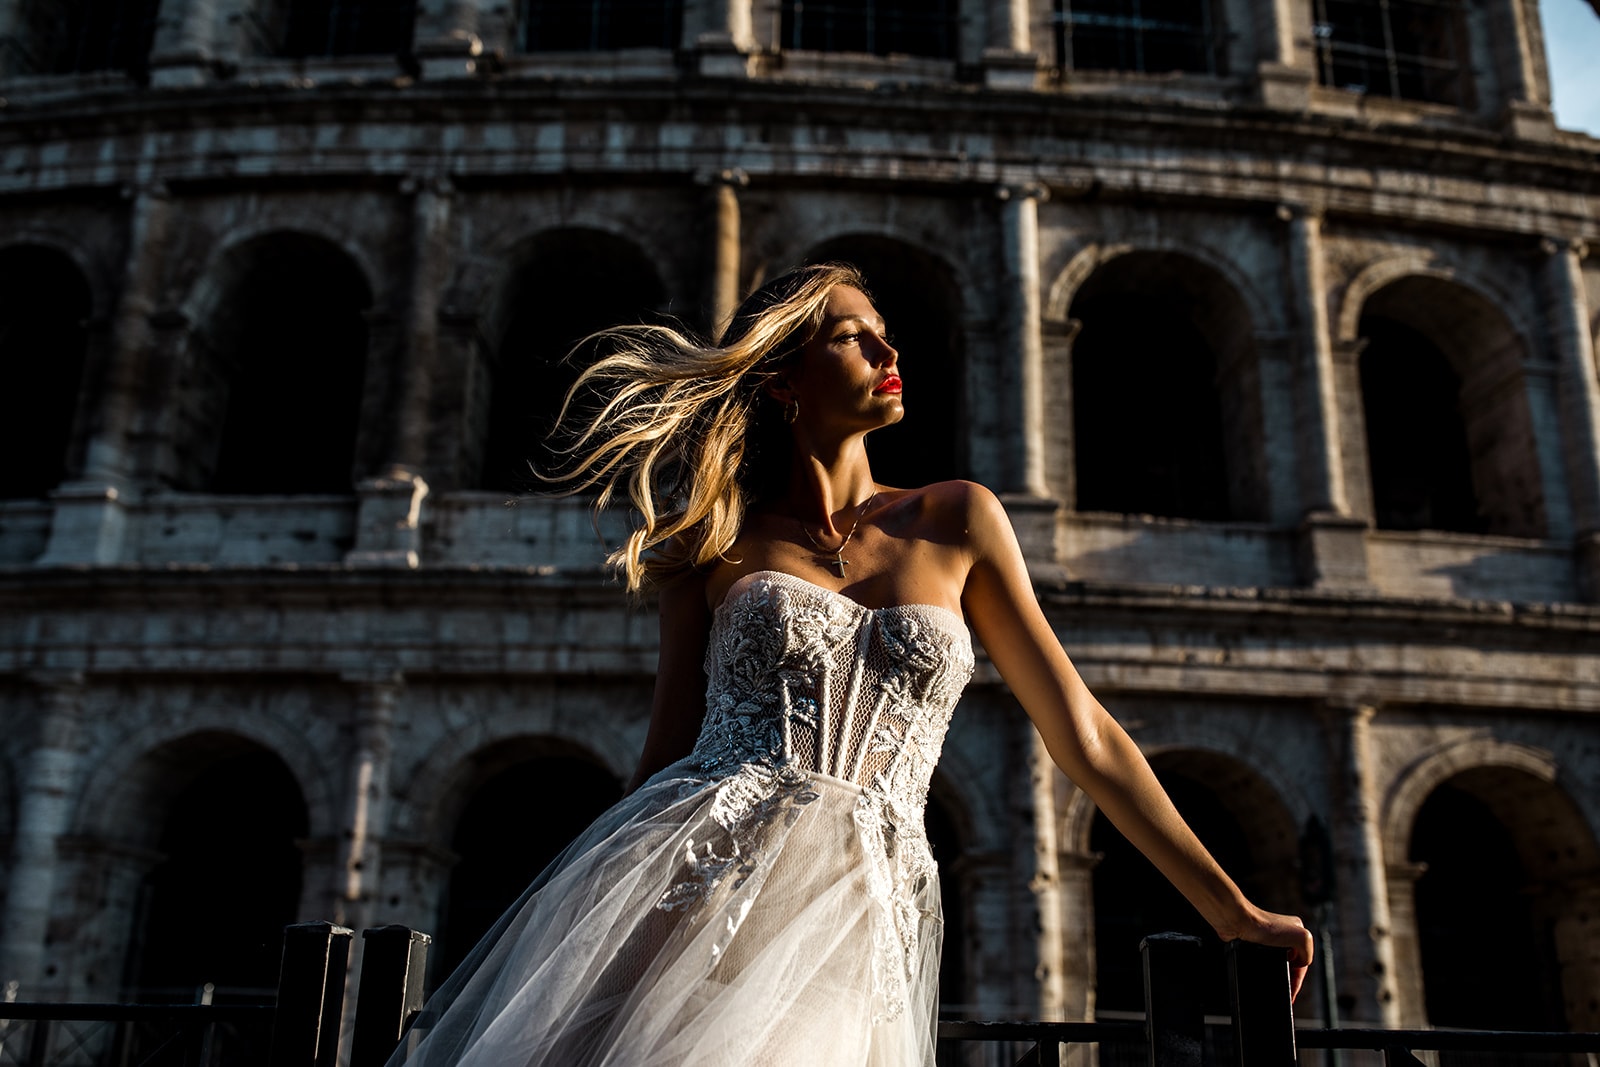 A model bride wearing a wedding gown stands before the Coliseum in Rome